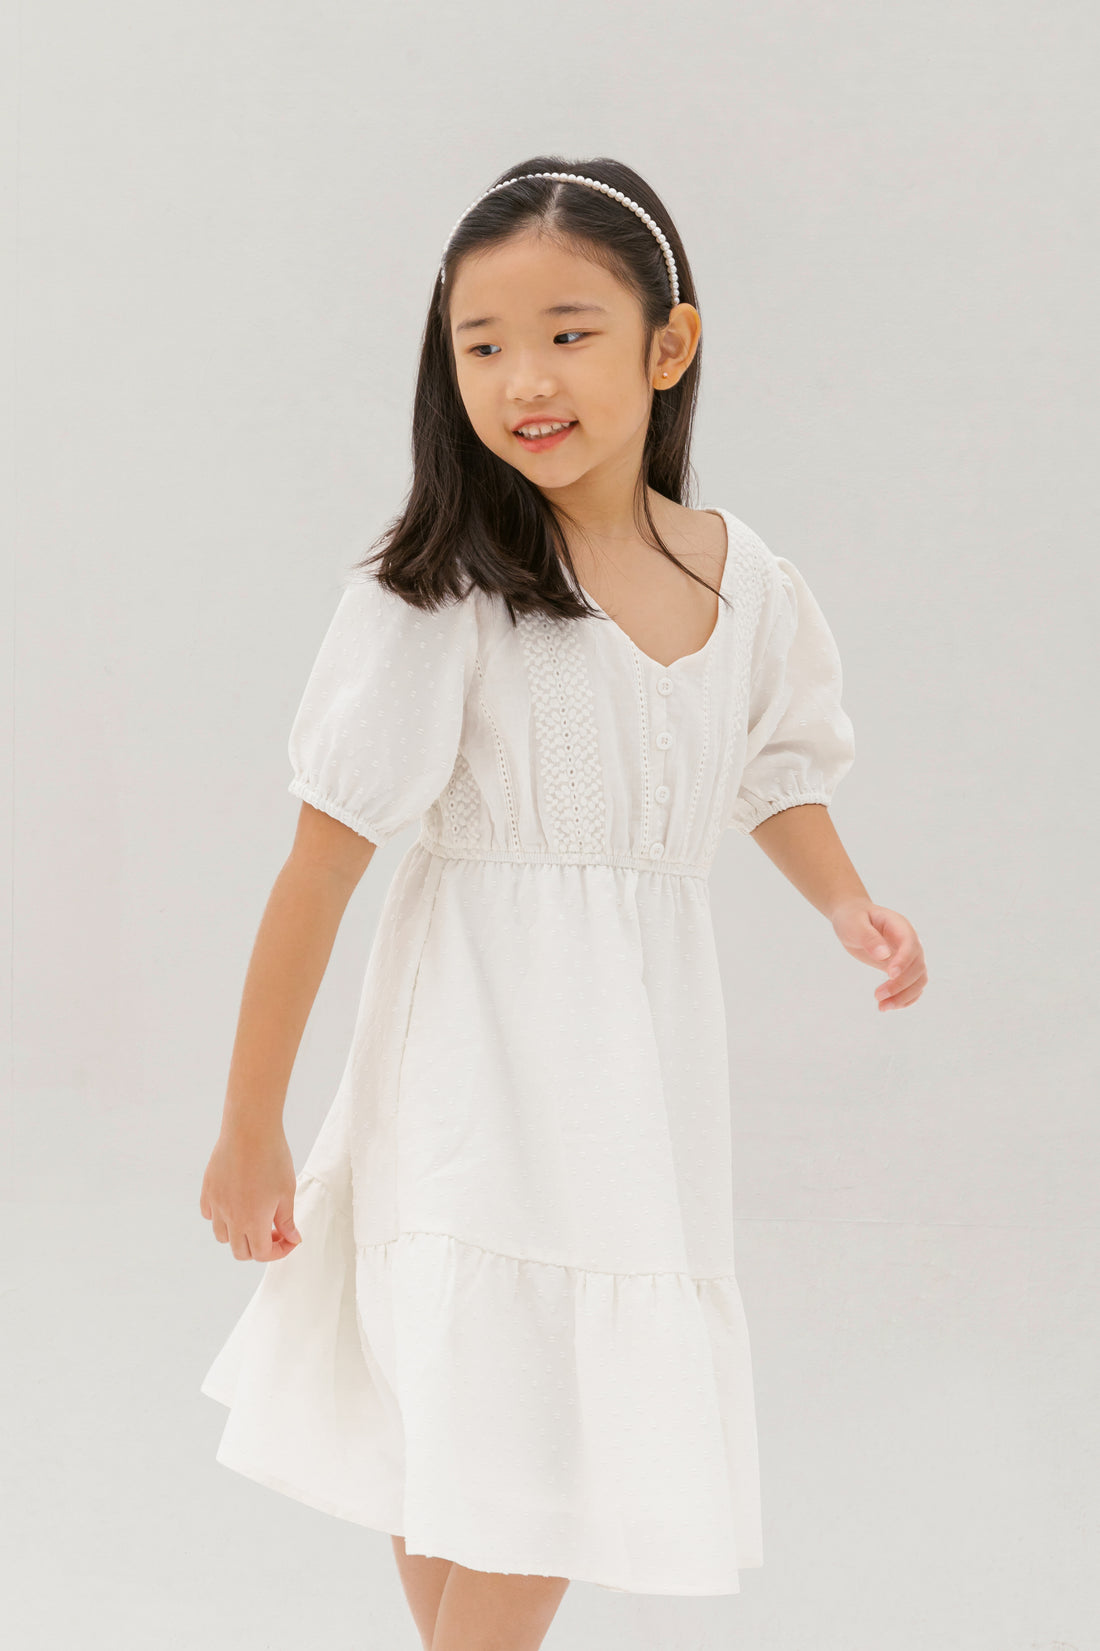 Caylee Embroidered Eyelet Dress In White